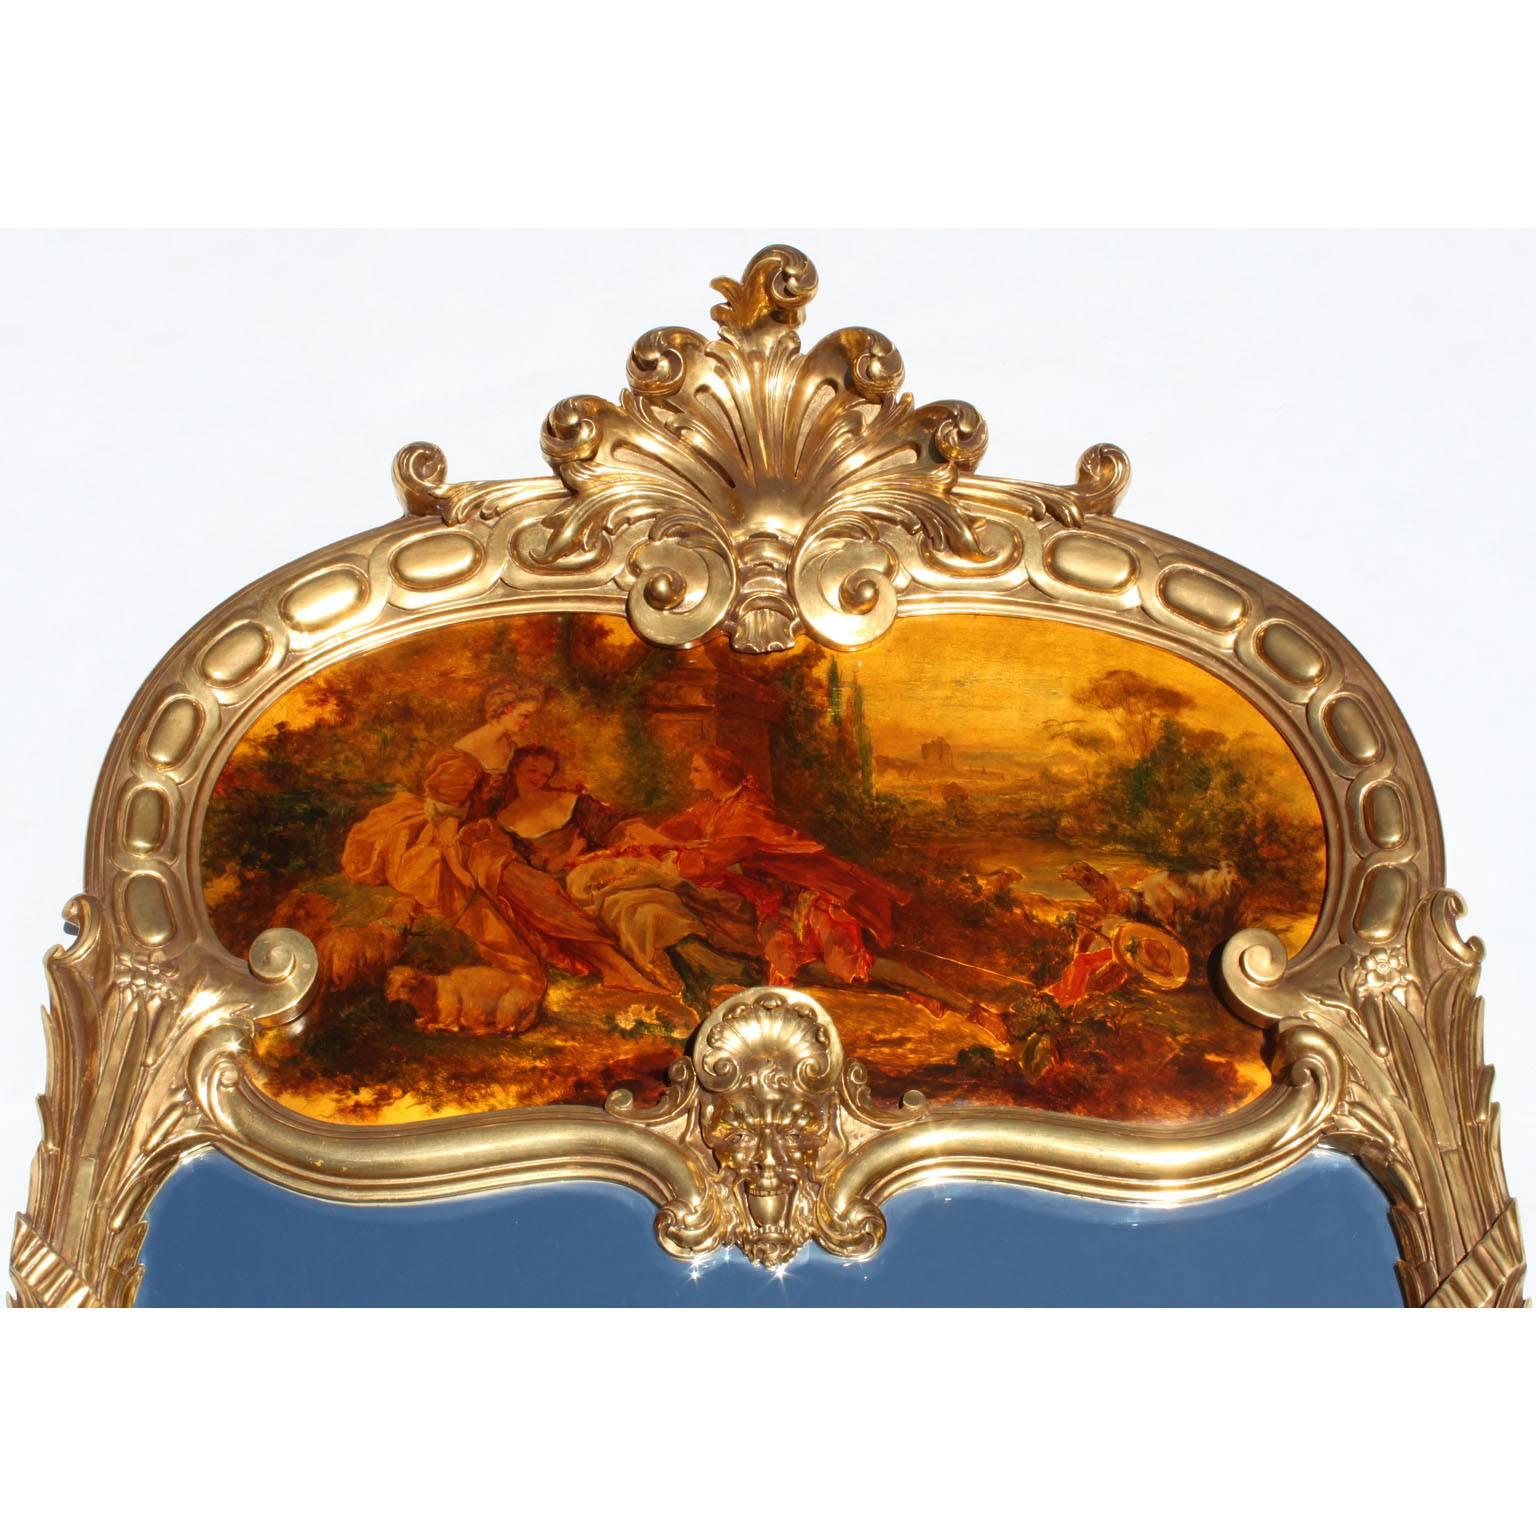 A fine French 19th-20th century Louis XV style giltwood carved figural trumeau mirror. The elongated frame crowned with a carved floral shell above an allegorical mask of a satyr and centred with an oil on panel painting depicting an outdoor